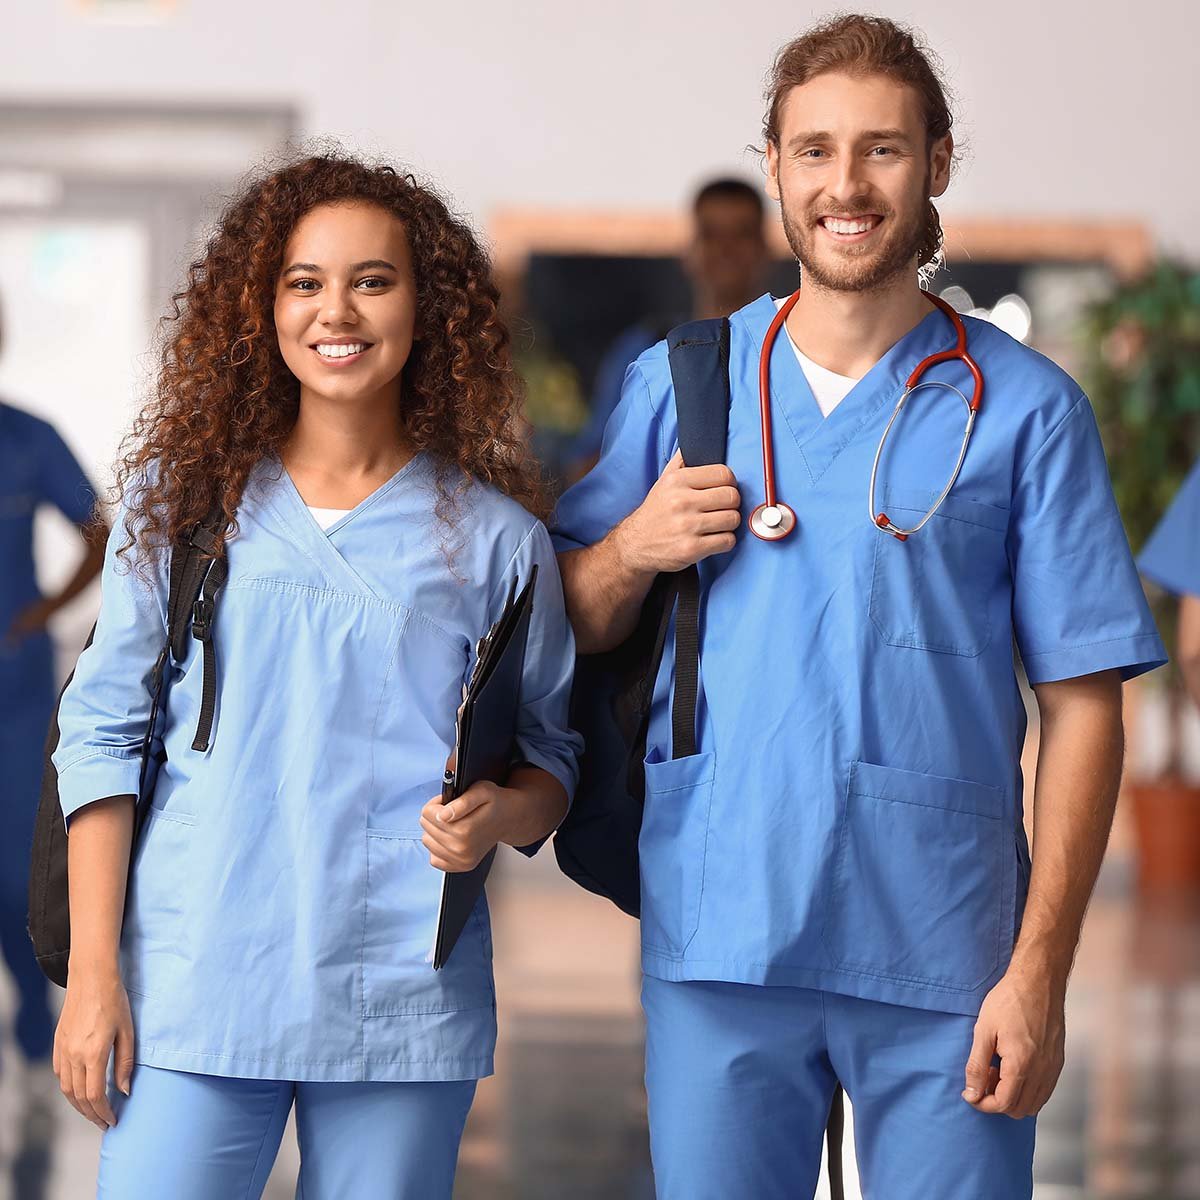 Two student nurses smile while standing in a hallway.